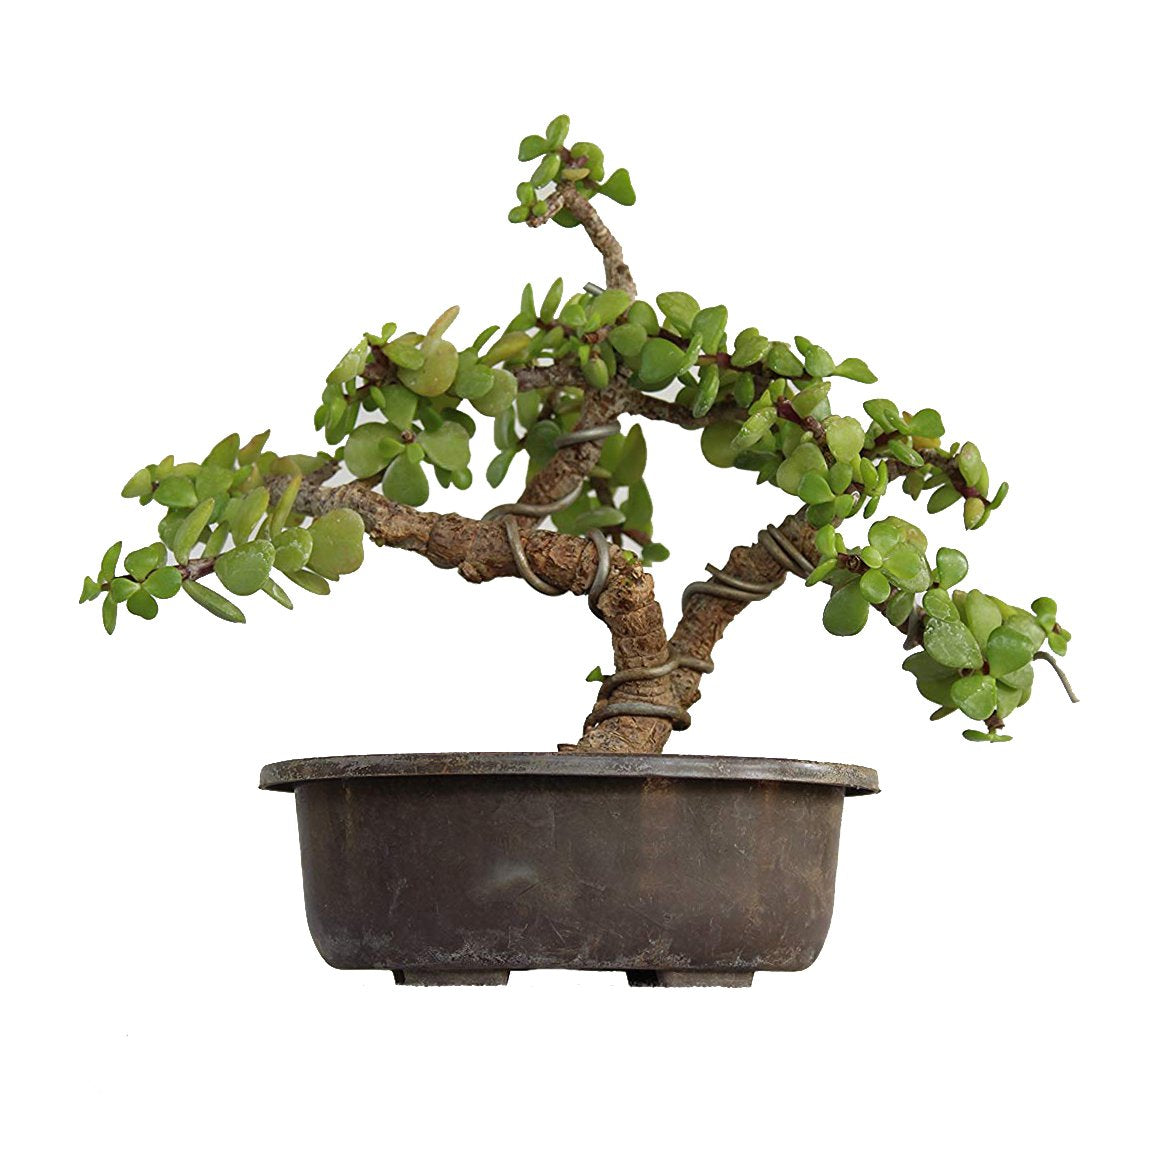 Green Paradise Bonsai Jade Goodluck Tree 6 years old With Pot (Live Plant)